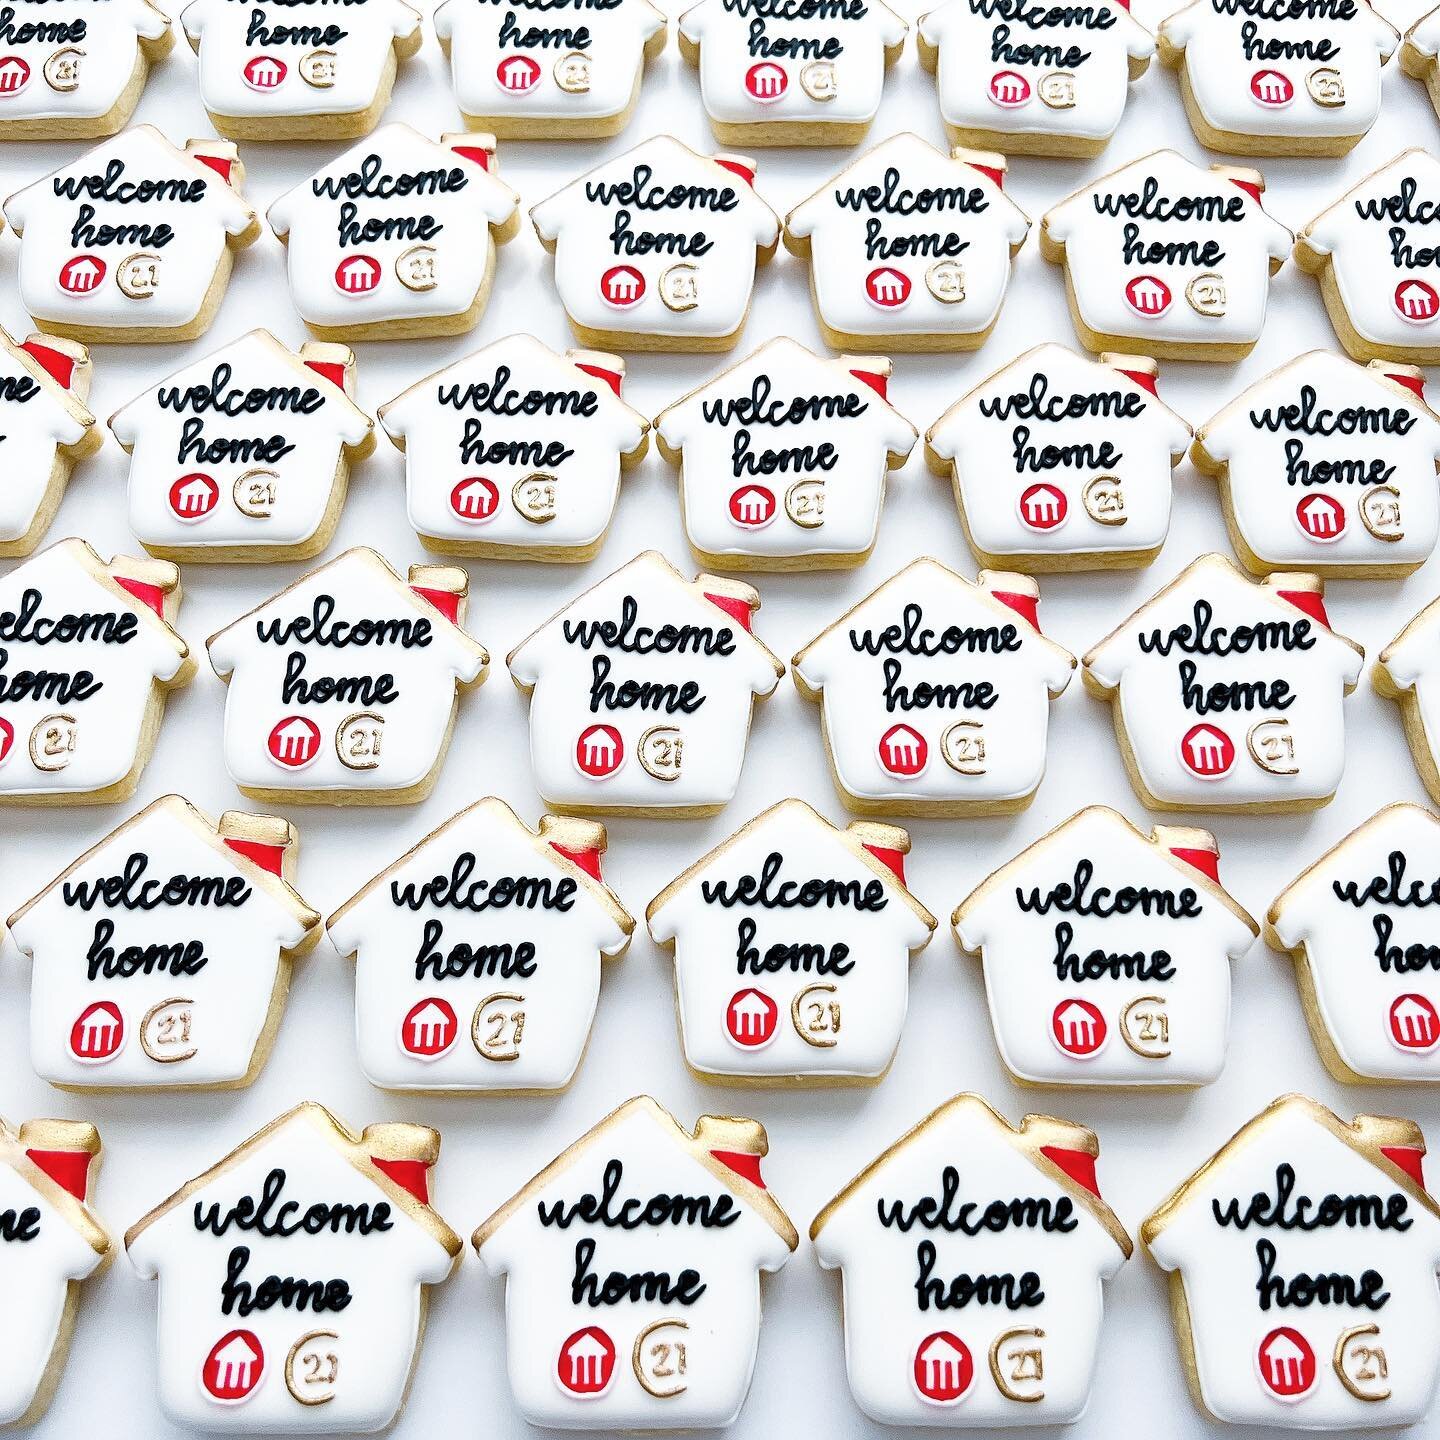 Welcome Home

Mini house cookies complete with logos make the perfect giveaway treat. Mini cookies are cost effective without sacrificing design or quality. Plus you still get something deliciously sweet to treat yourself and your customers with!

#s